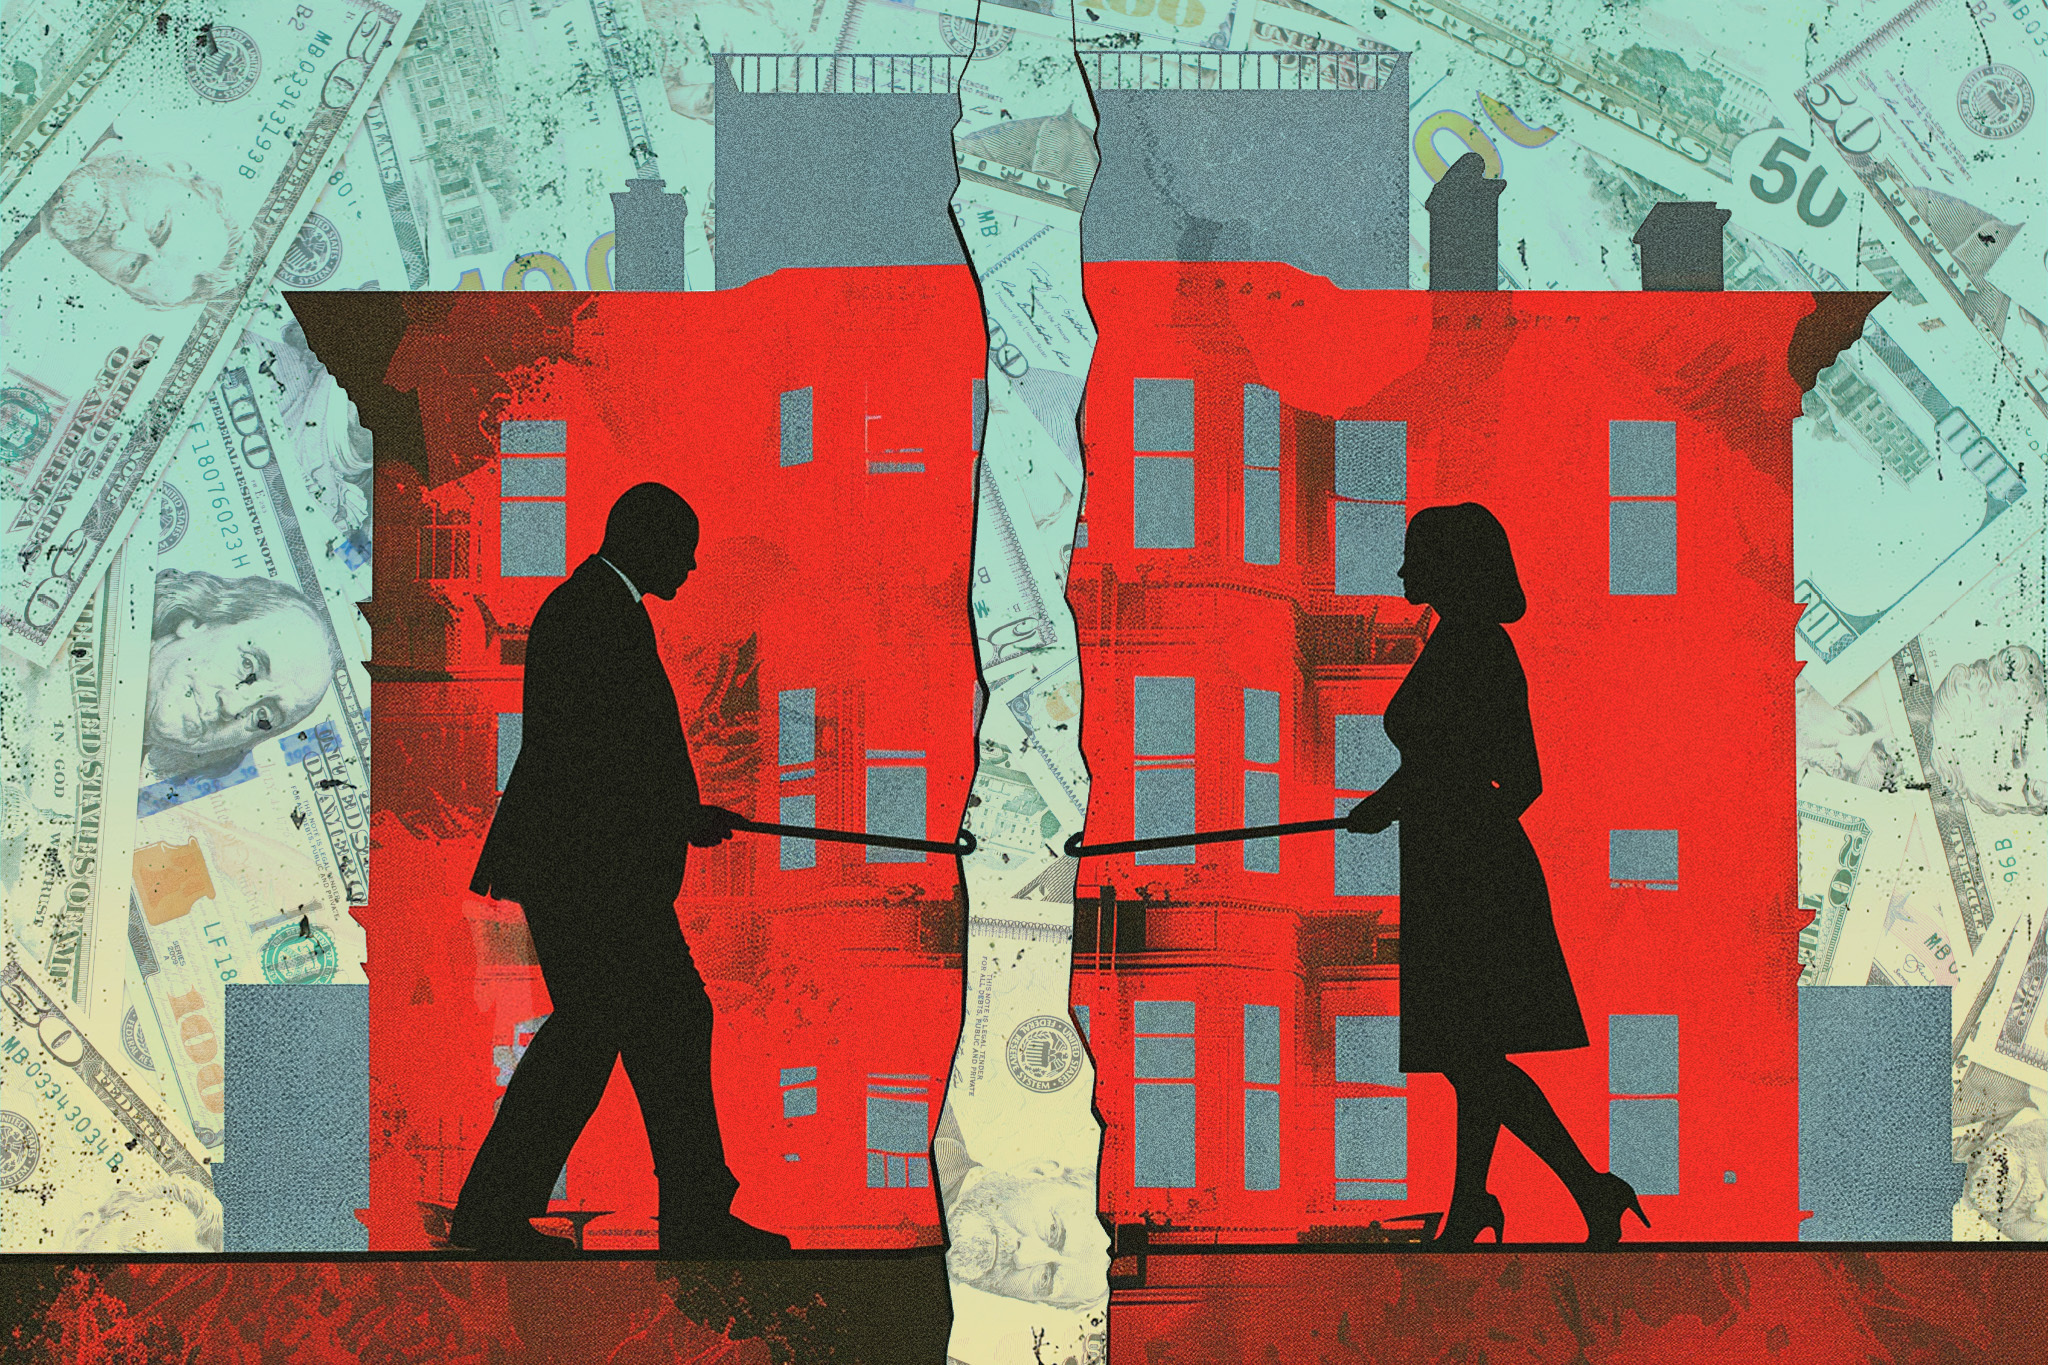 The image features silhouettes of a man and a woman pulling a saw across a red house, against a backdrop of various currency notes.